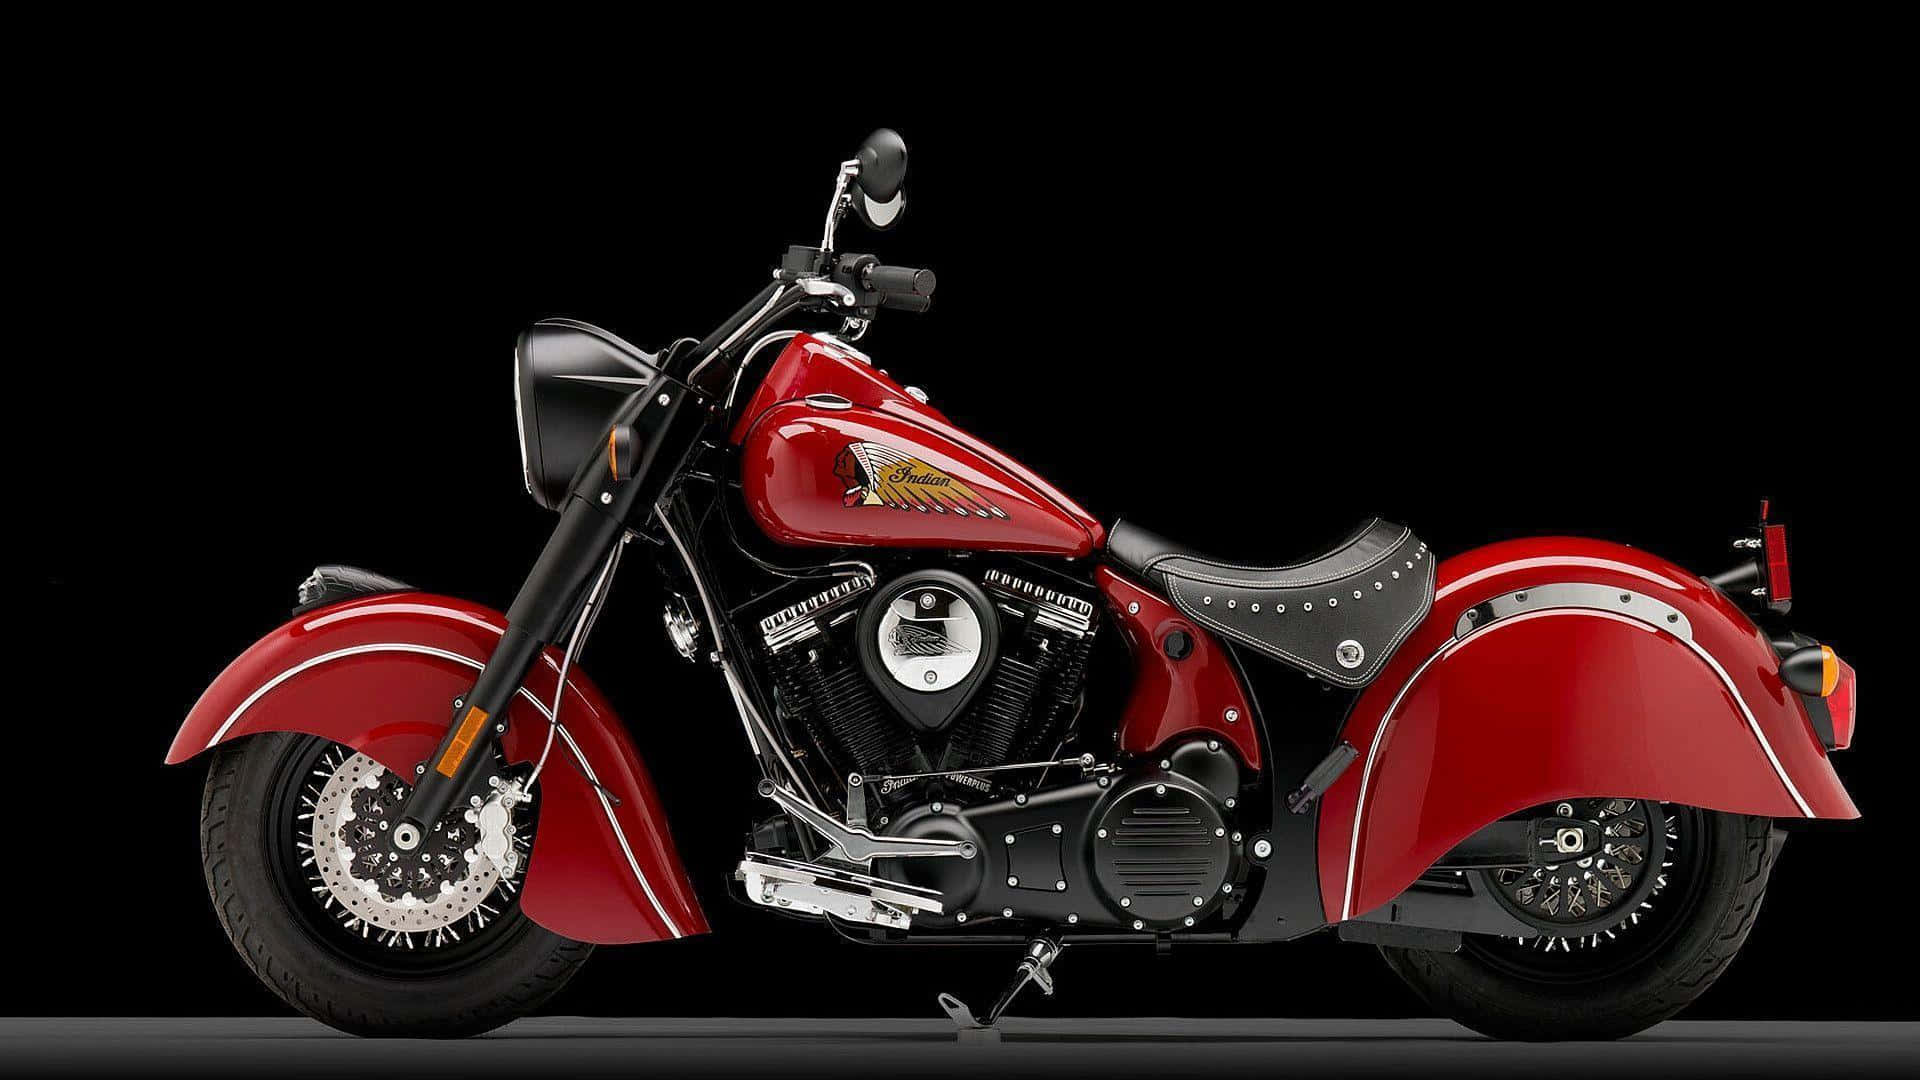 Epic Ride On Indian Motorcycle Wallpaper